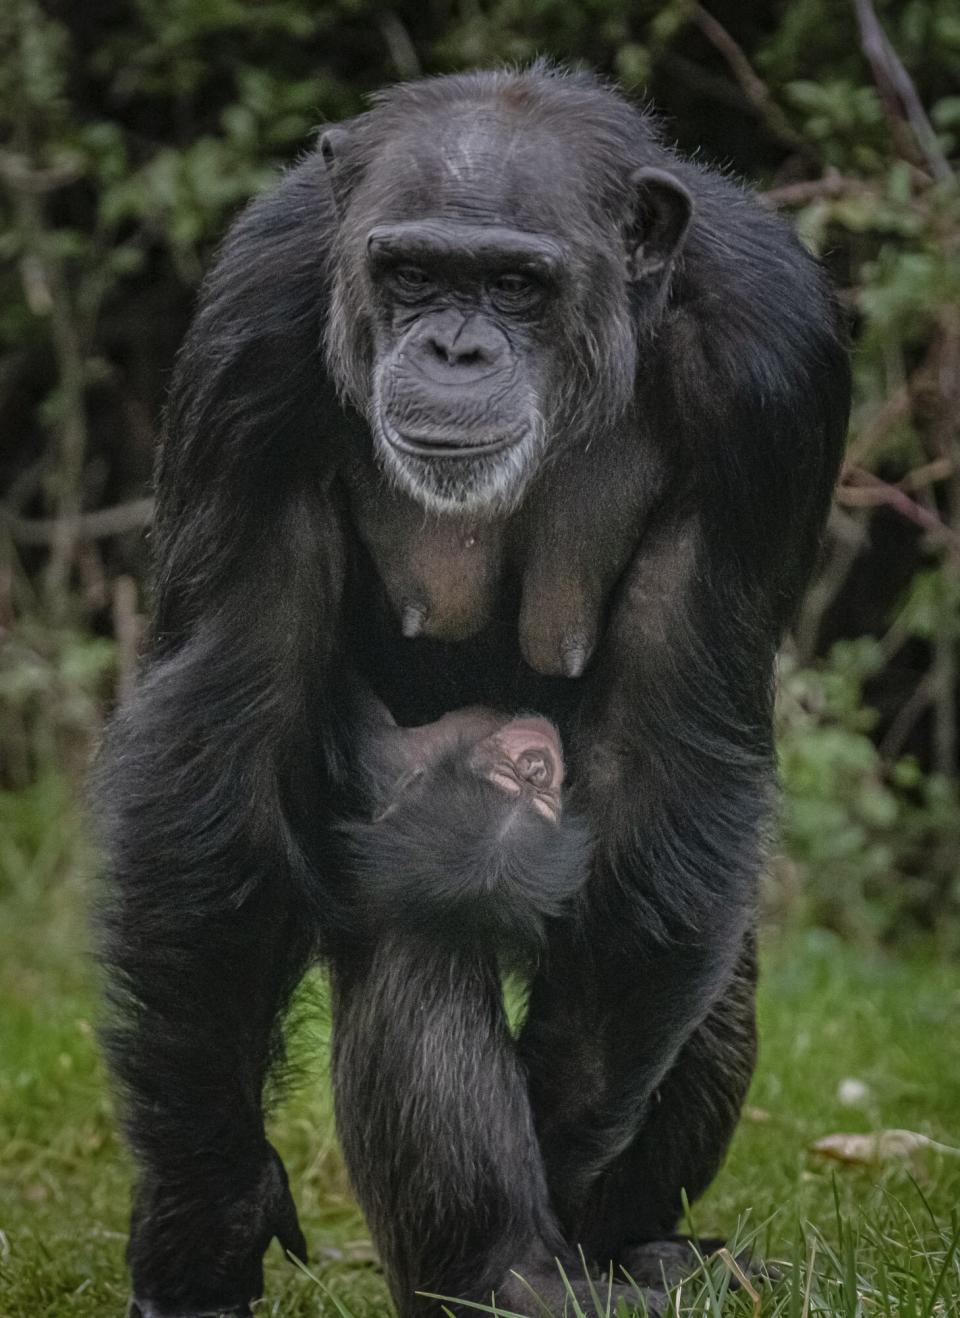 A critically endagered Western chimpanzee born at Chester Zoo, to mum Zee Zee, offers hope to the species.